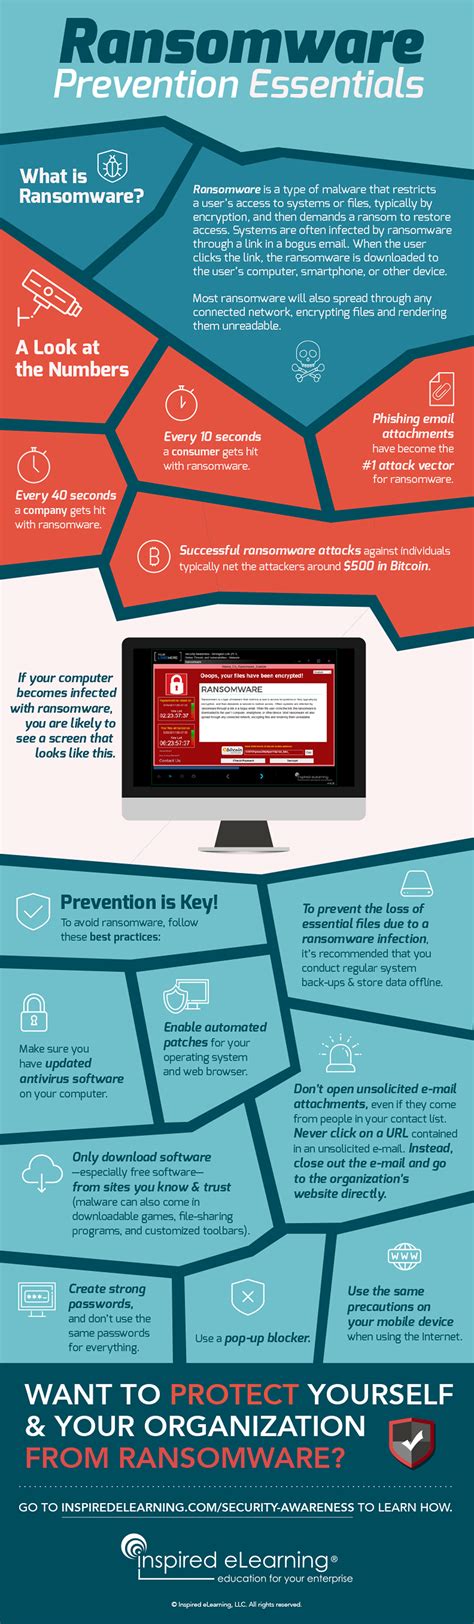 ransomware prevention essentials inspired elearning resources